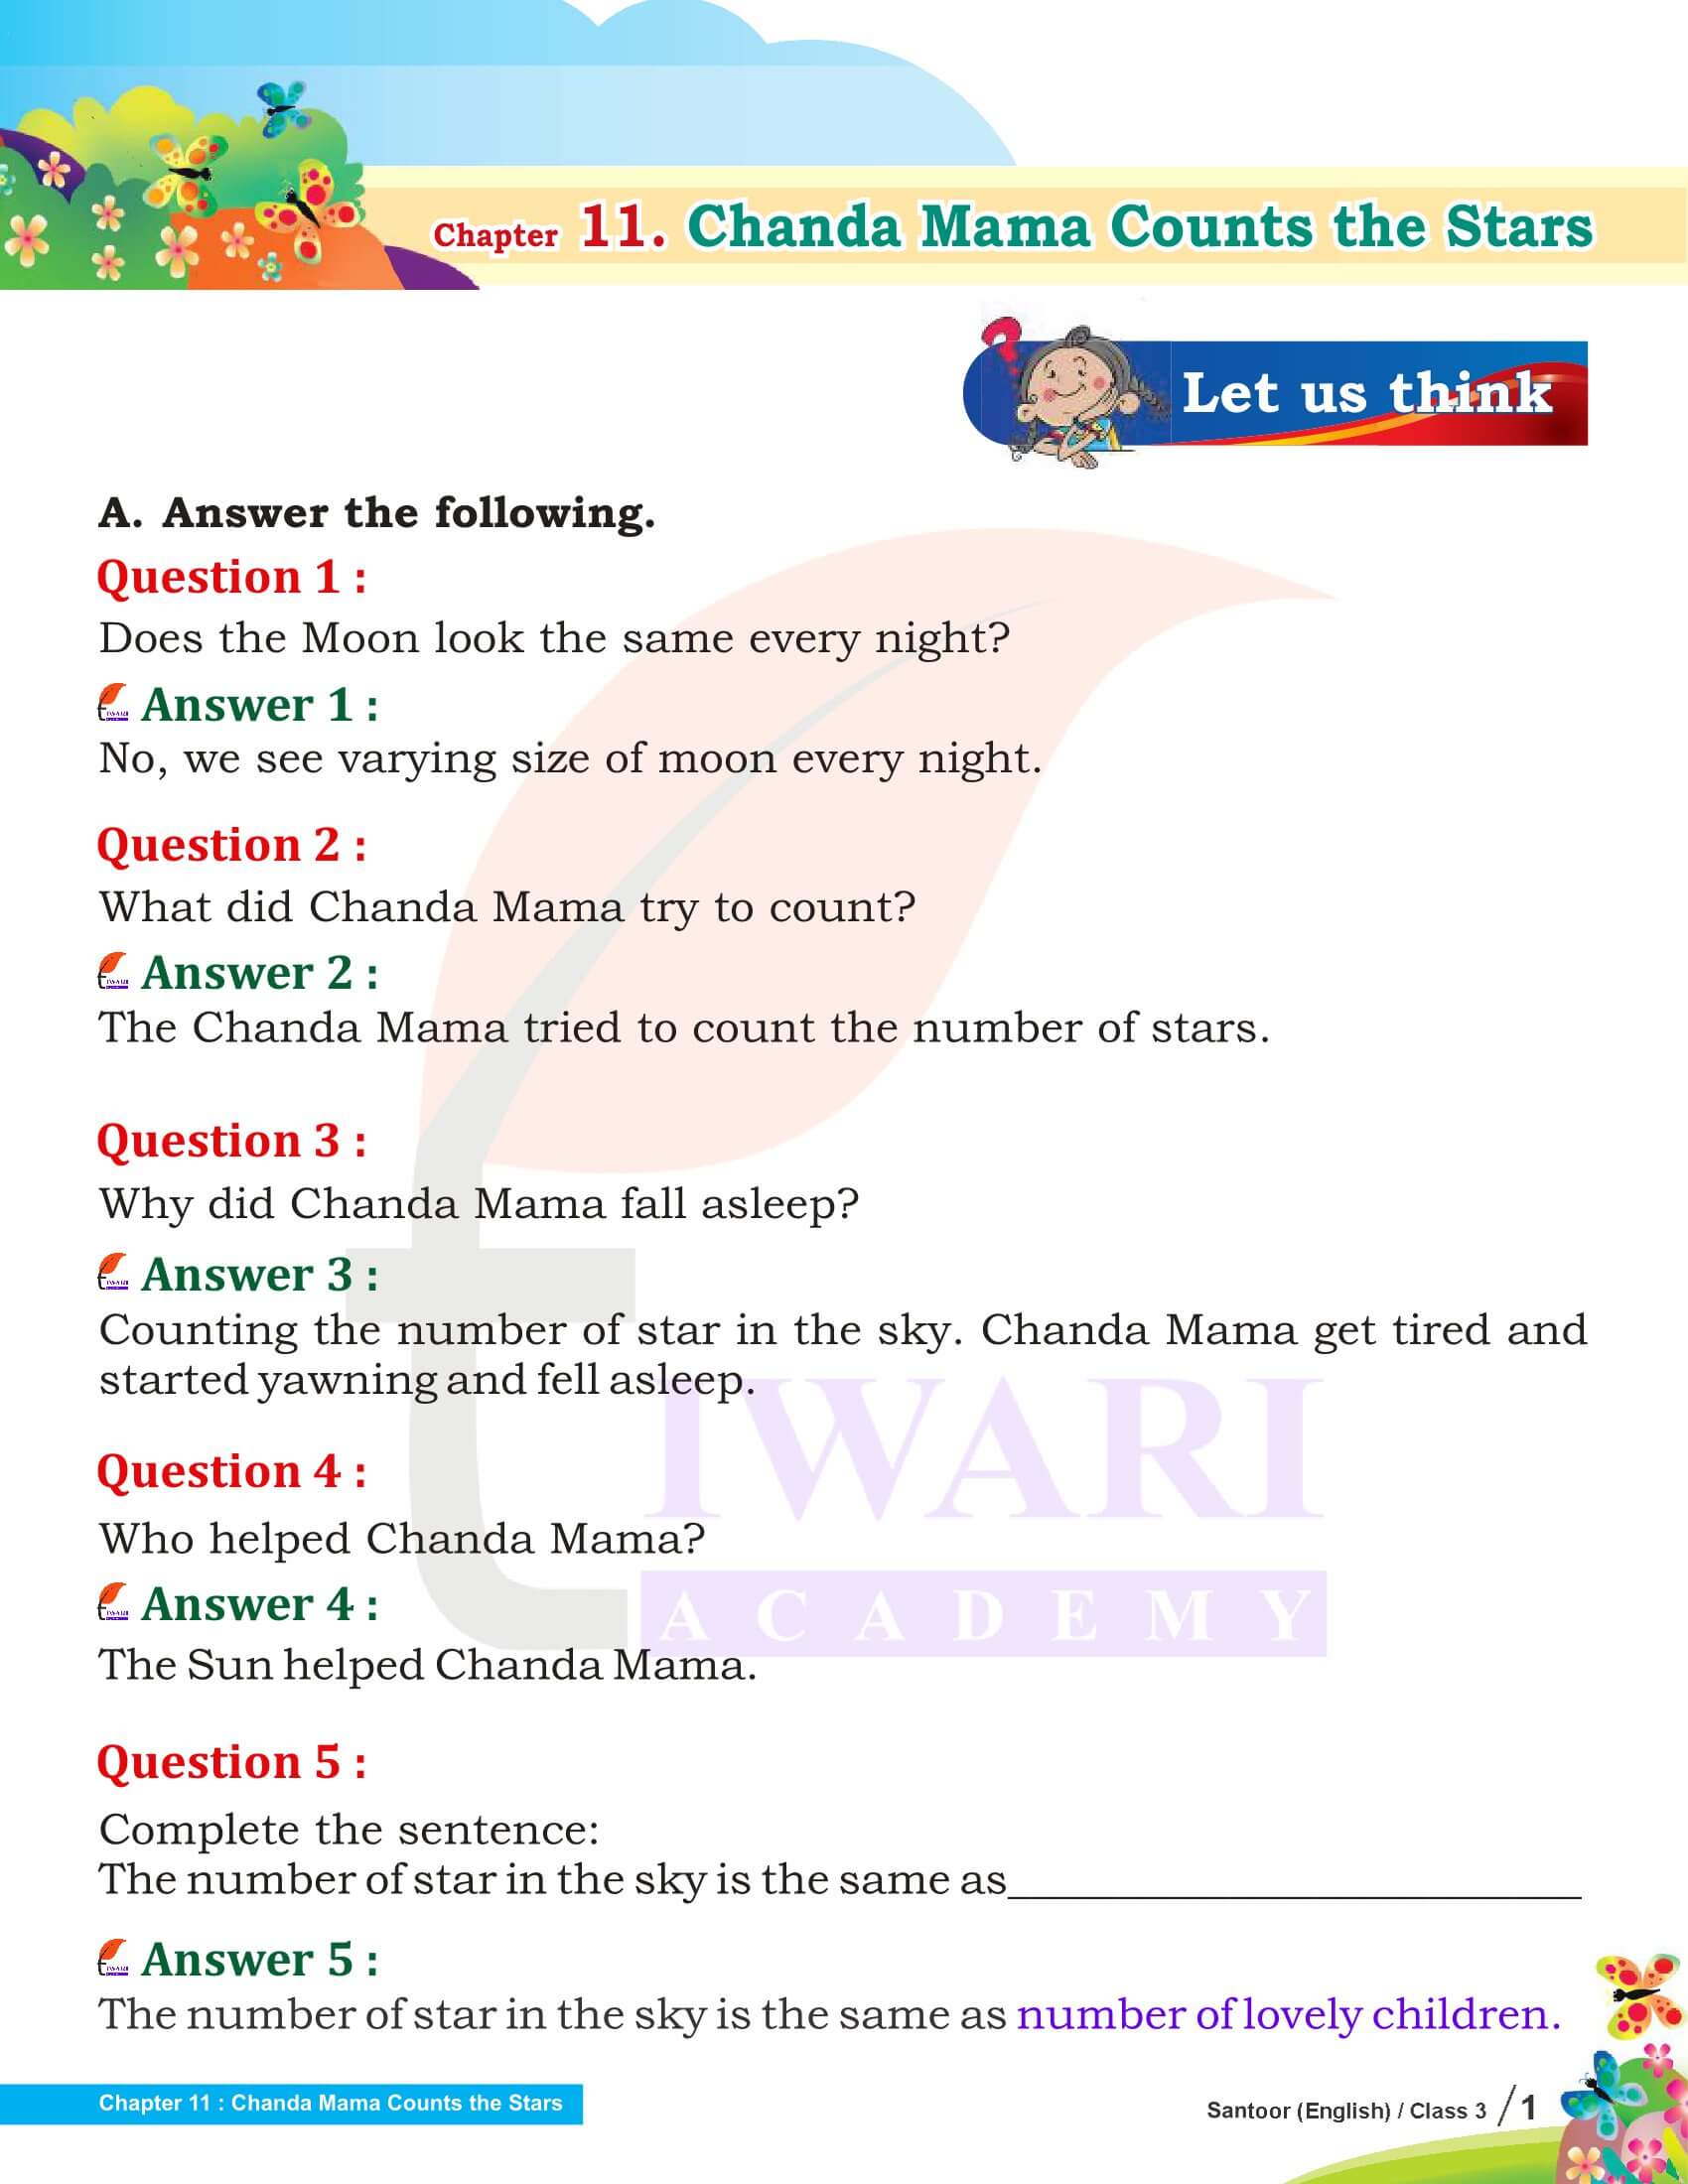 NCERT Solutions for Class 3 English Santoor Chapter 11